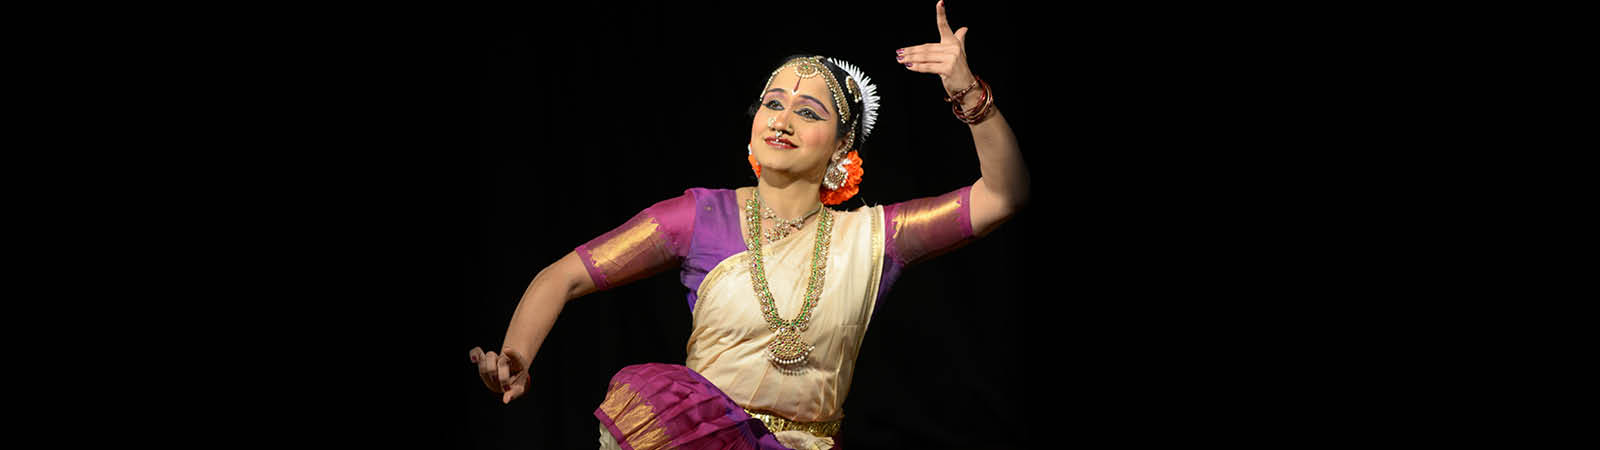 Perfect angle | Indian classical dance, Indian dance, Dance of india